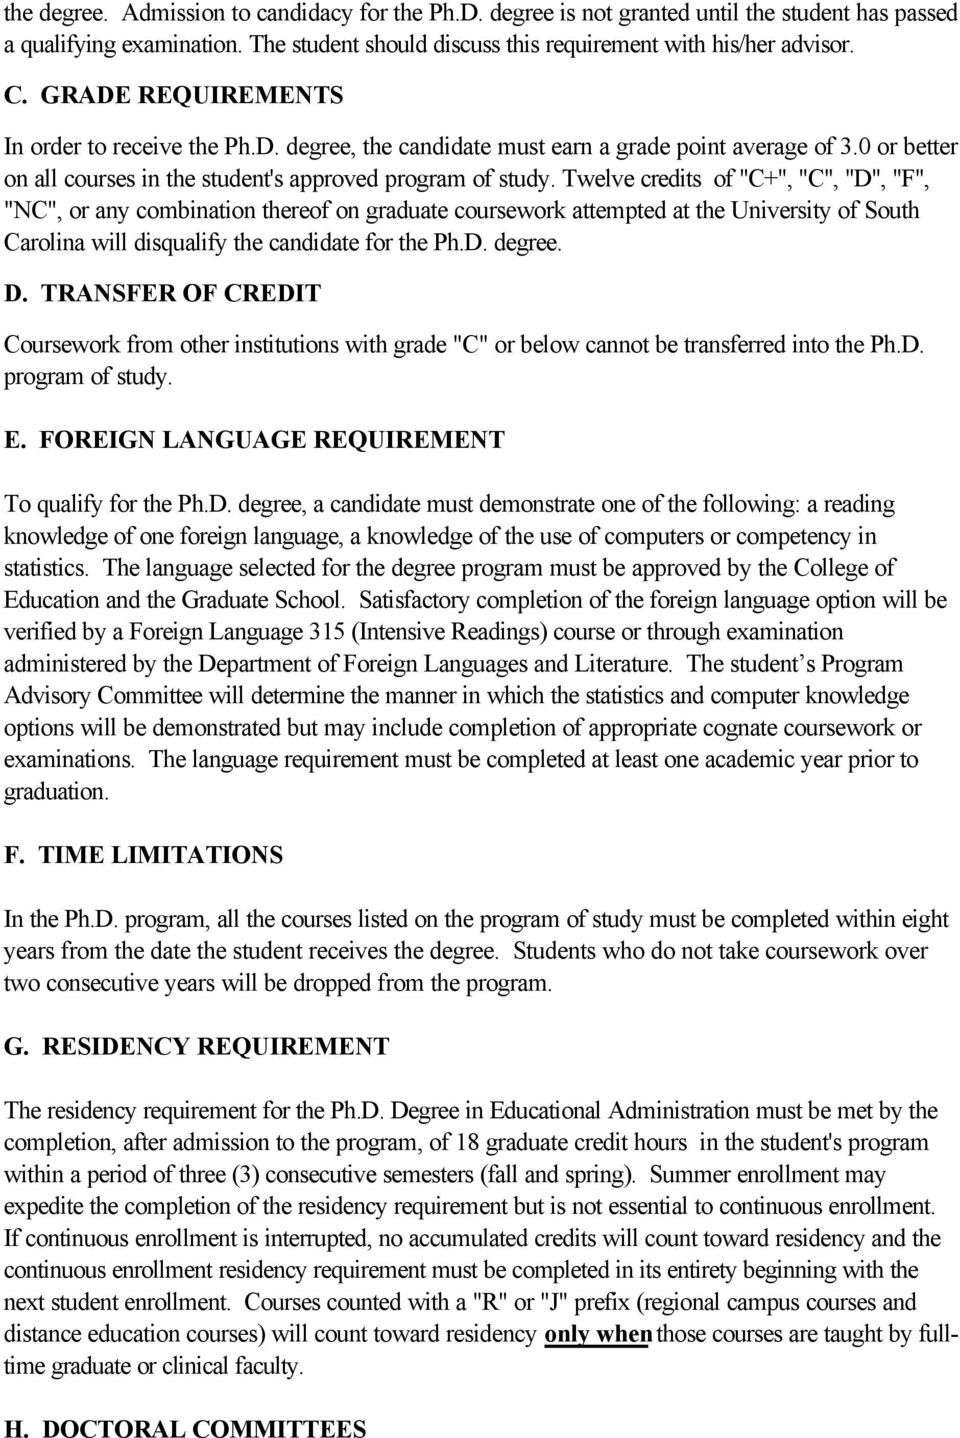 Twelve credits of "C+", "C", "D", "F", "NC", or any combination thereof on graduate coursework attempted at the University of South Carolina will disqualify the candidate for the Ph.D. degree. D.